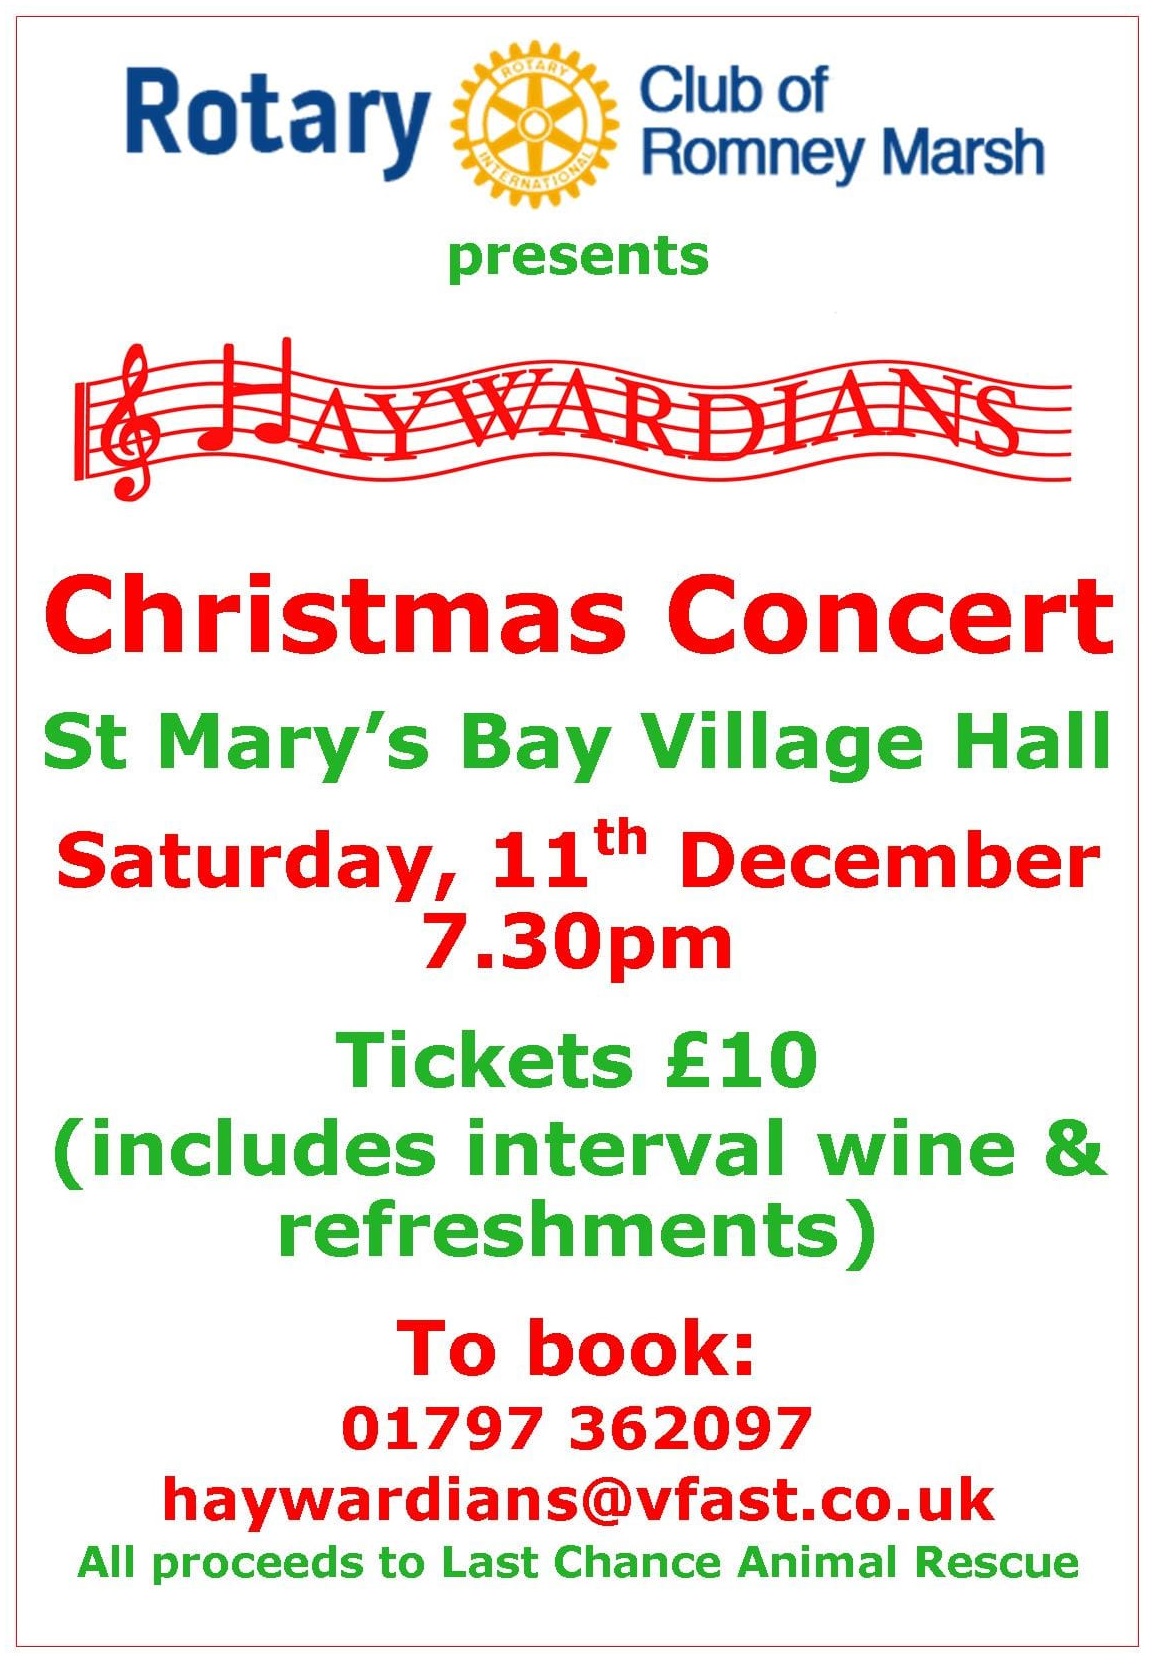 Rotary Club of Romney Marsh presents Haywardians Christmas Concert St Mary's Bay Village Hall Saturday 11th December 7.30pm Tickets £10 includes refreshments Call 01797362097 or email haywardians@vfast.co.uk to book All proceeds to Last Chance Animal Rescue